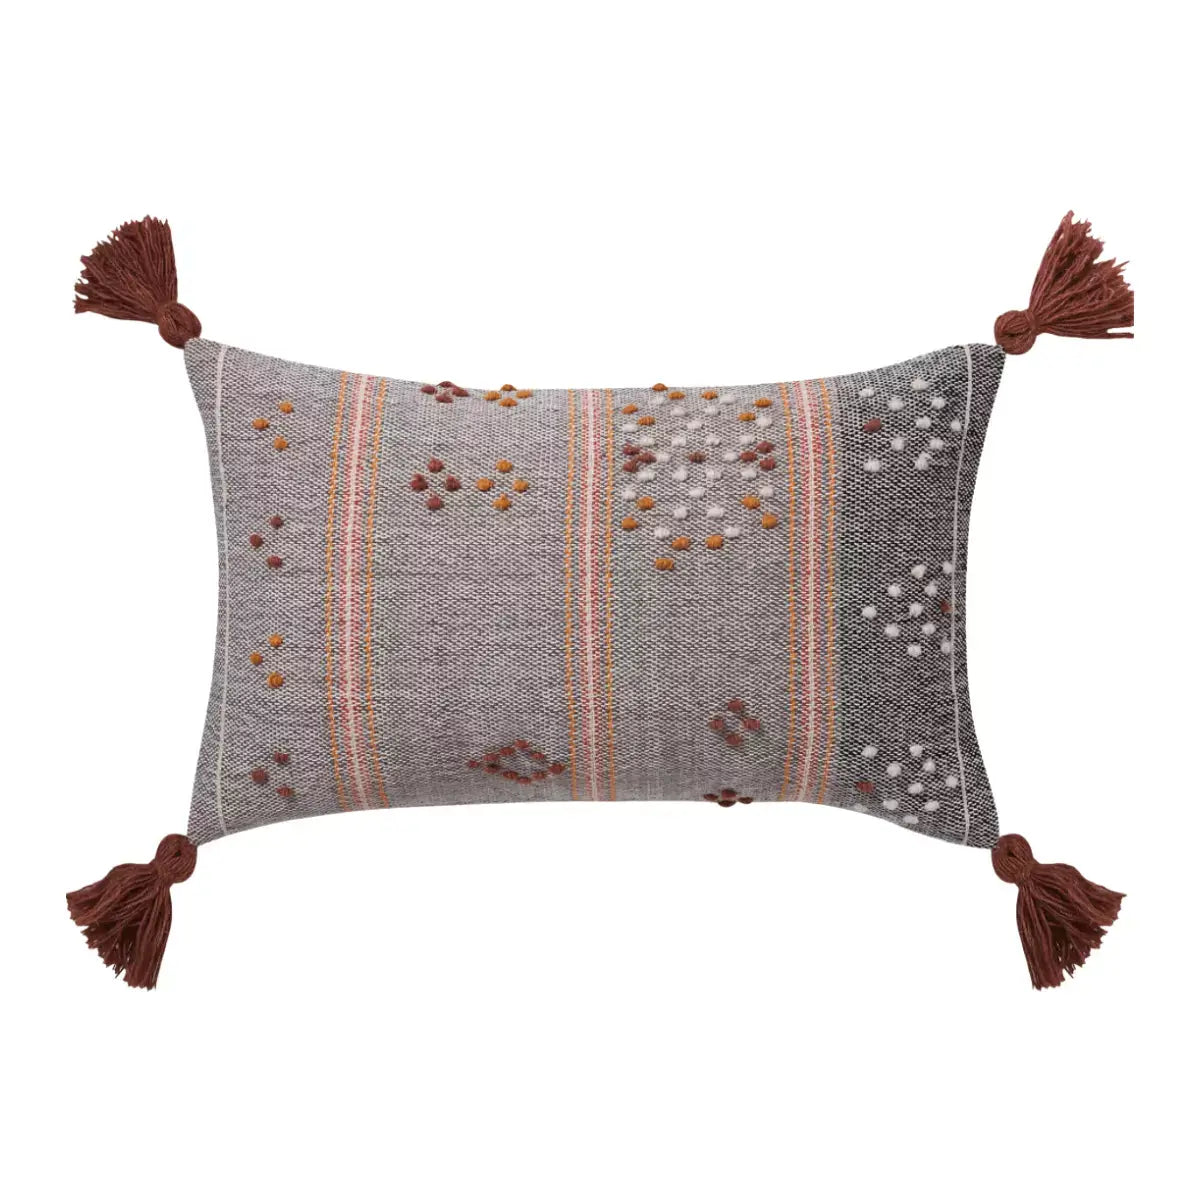 A Mya Mini Cushion by L&M Home, in grey and brown, with tassels.